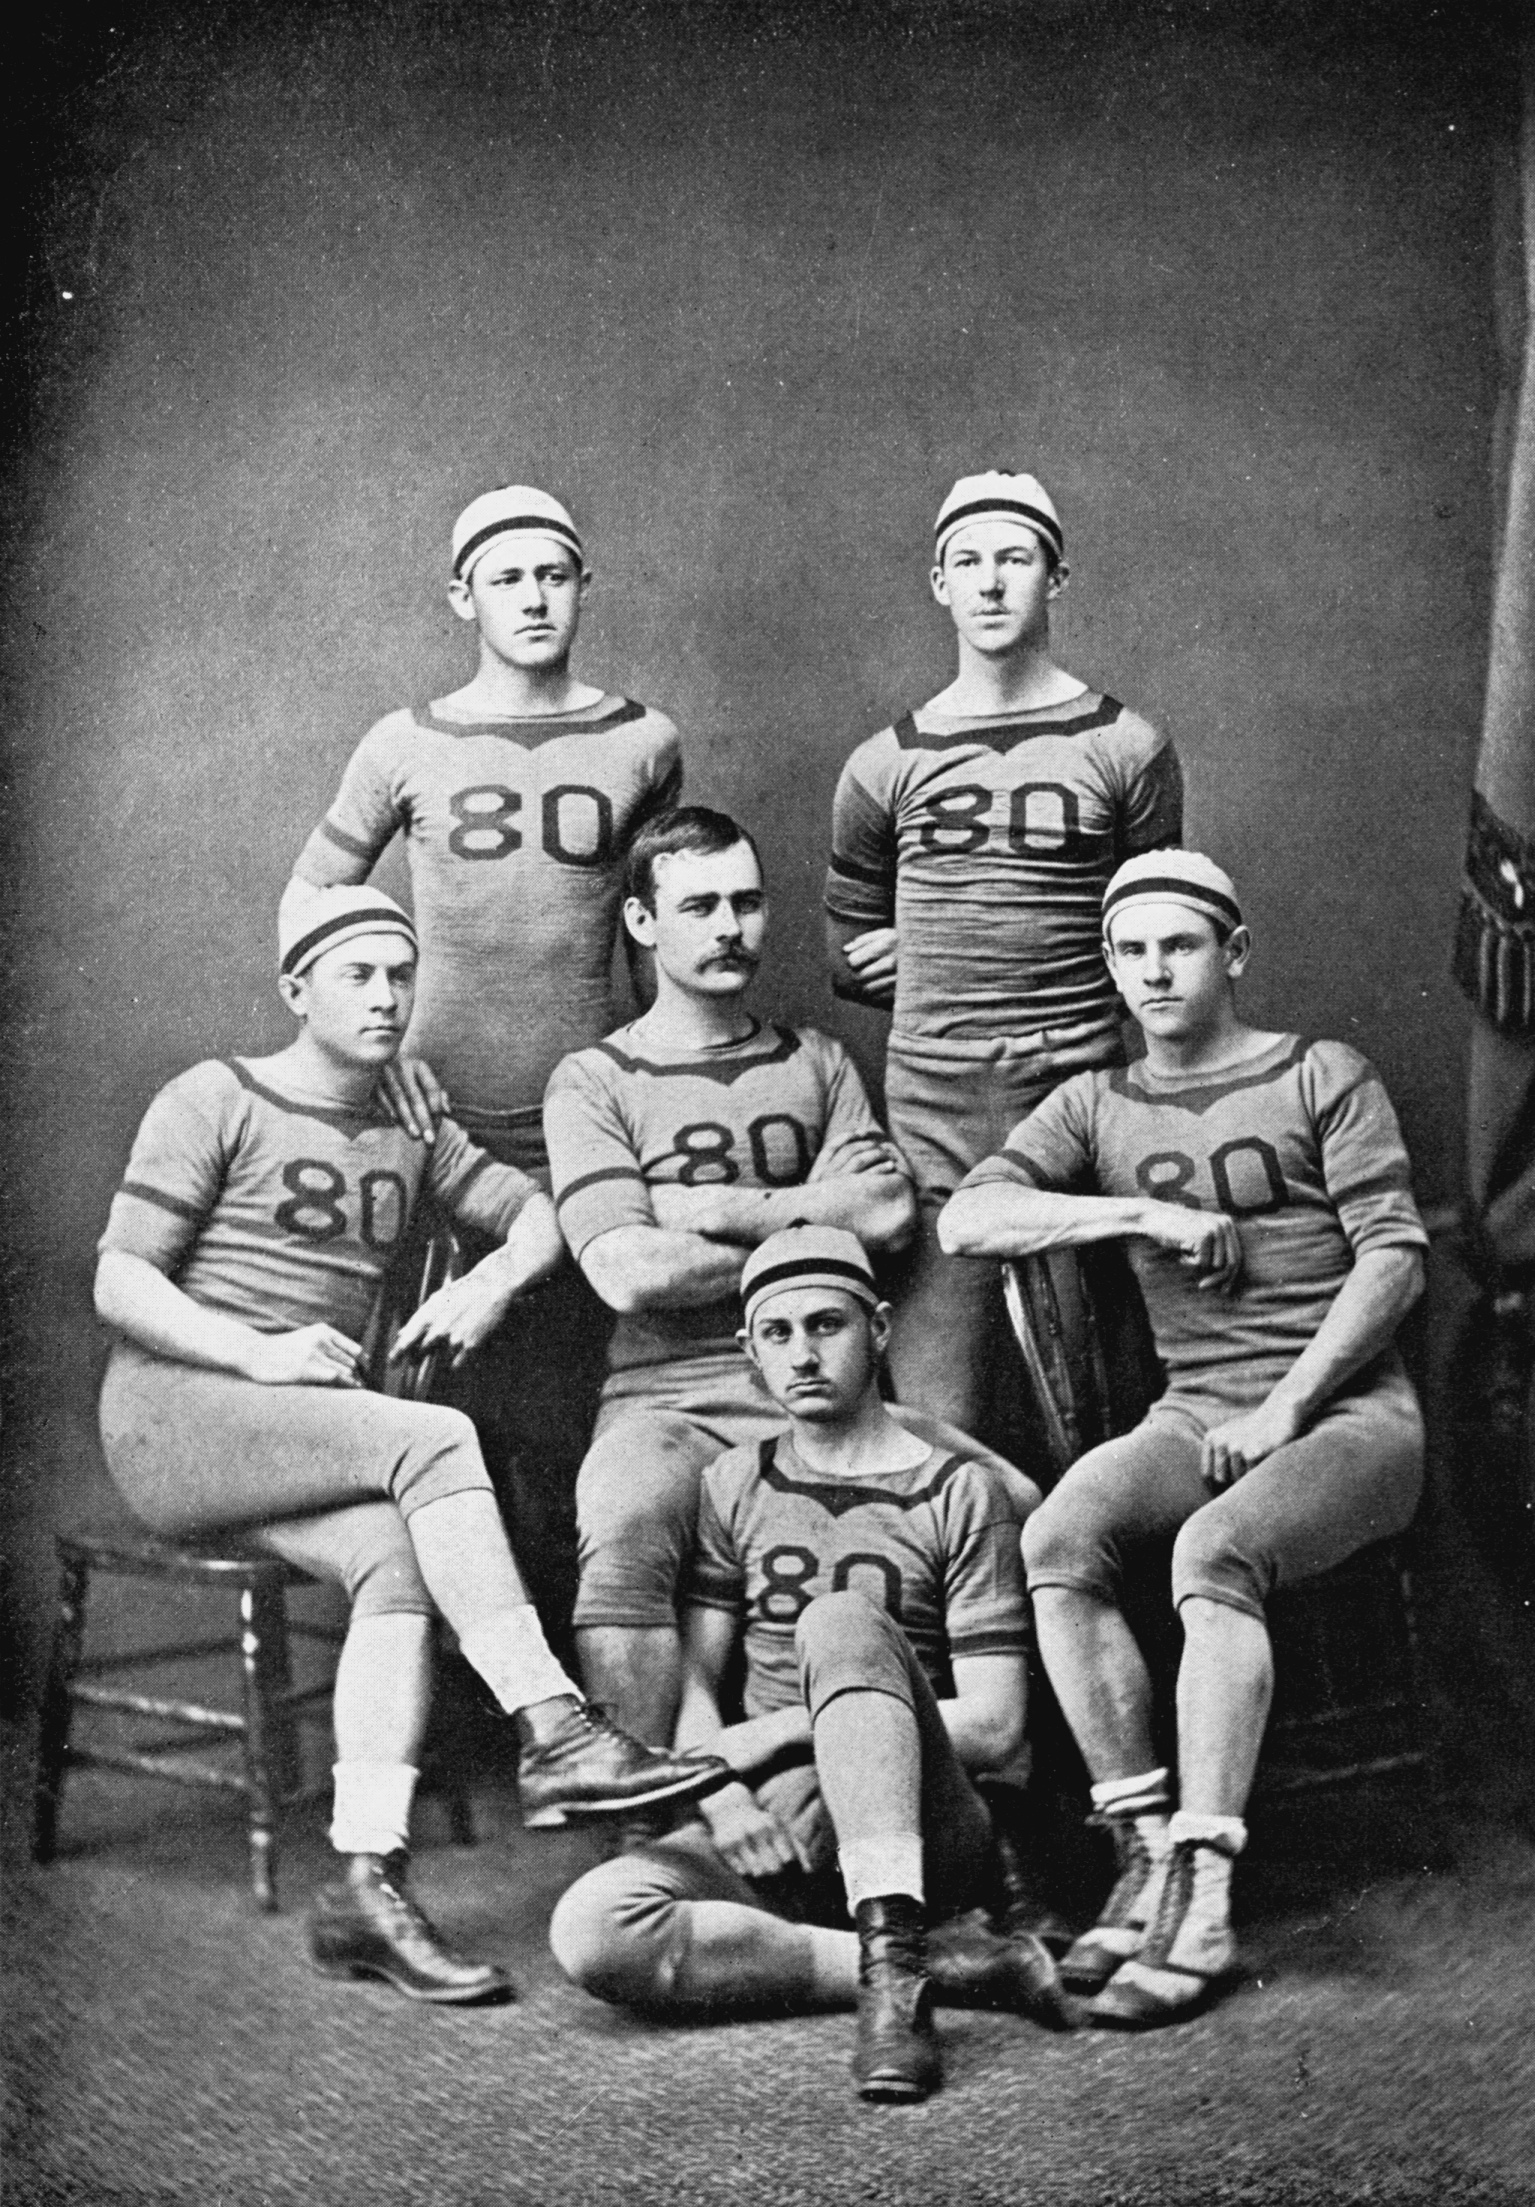 A group of baseball players posing for a photo